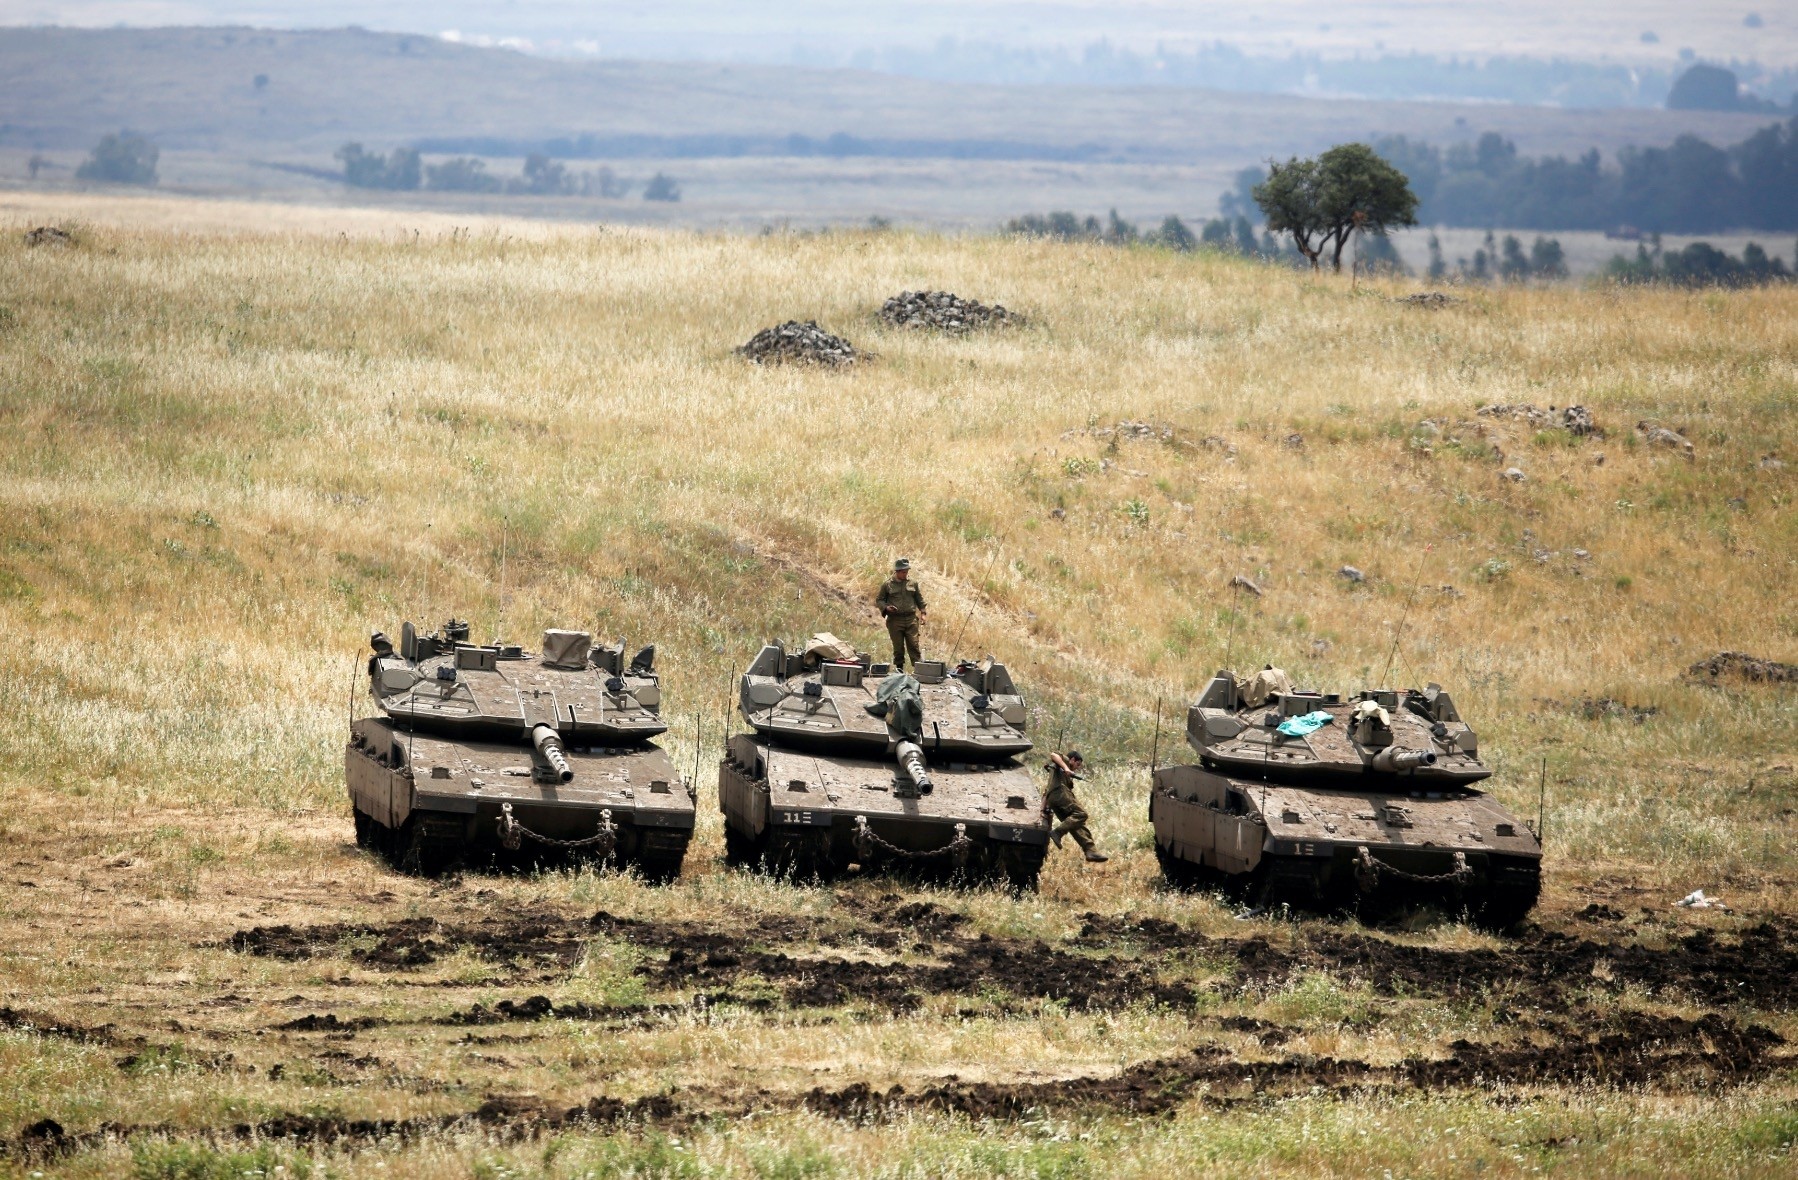 An Israeli soldier stands on a tank near the border with Syria in the Israeli-occupied Golan Heights, May 9.